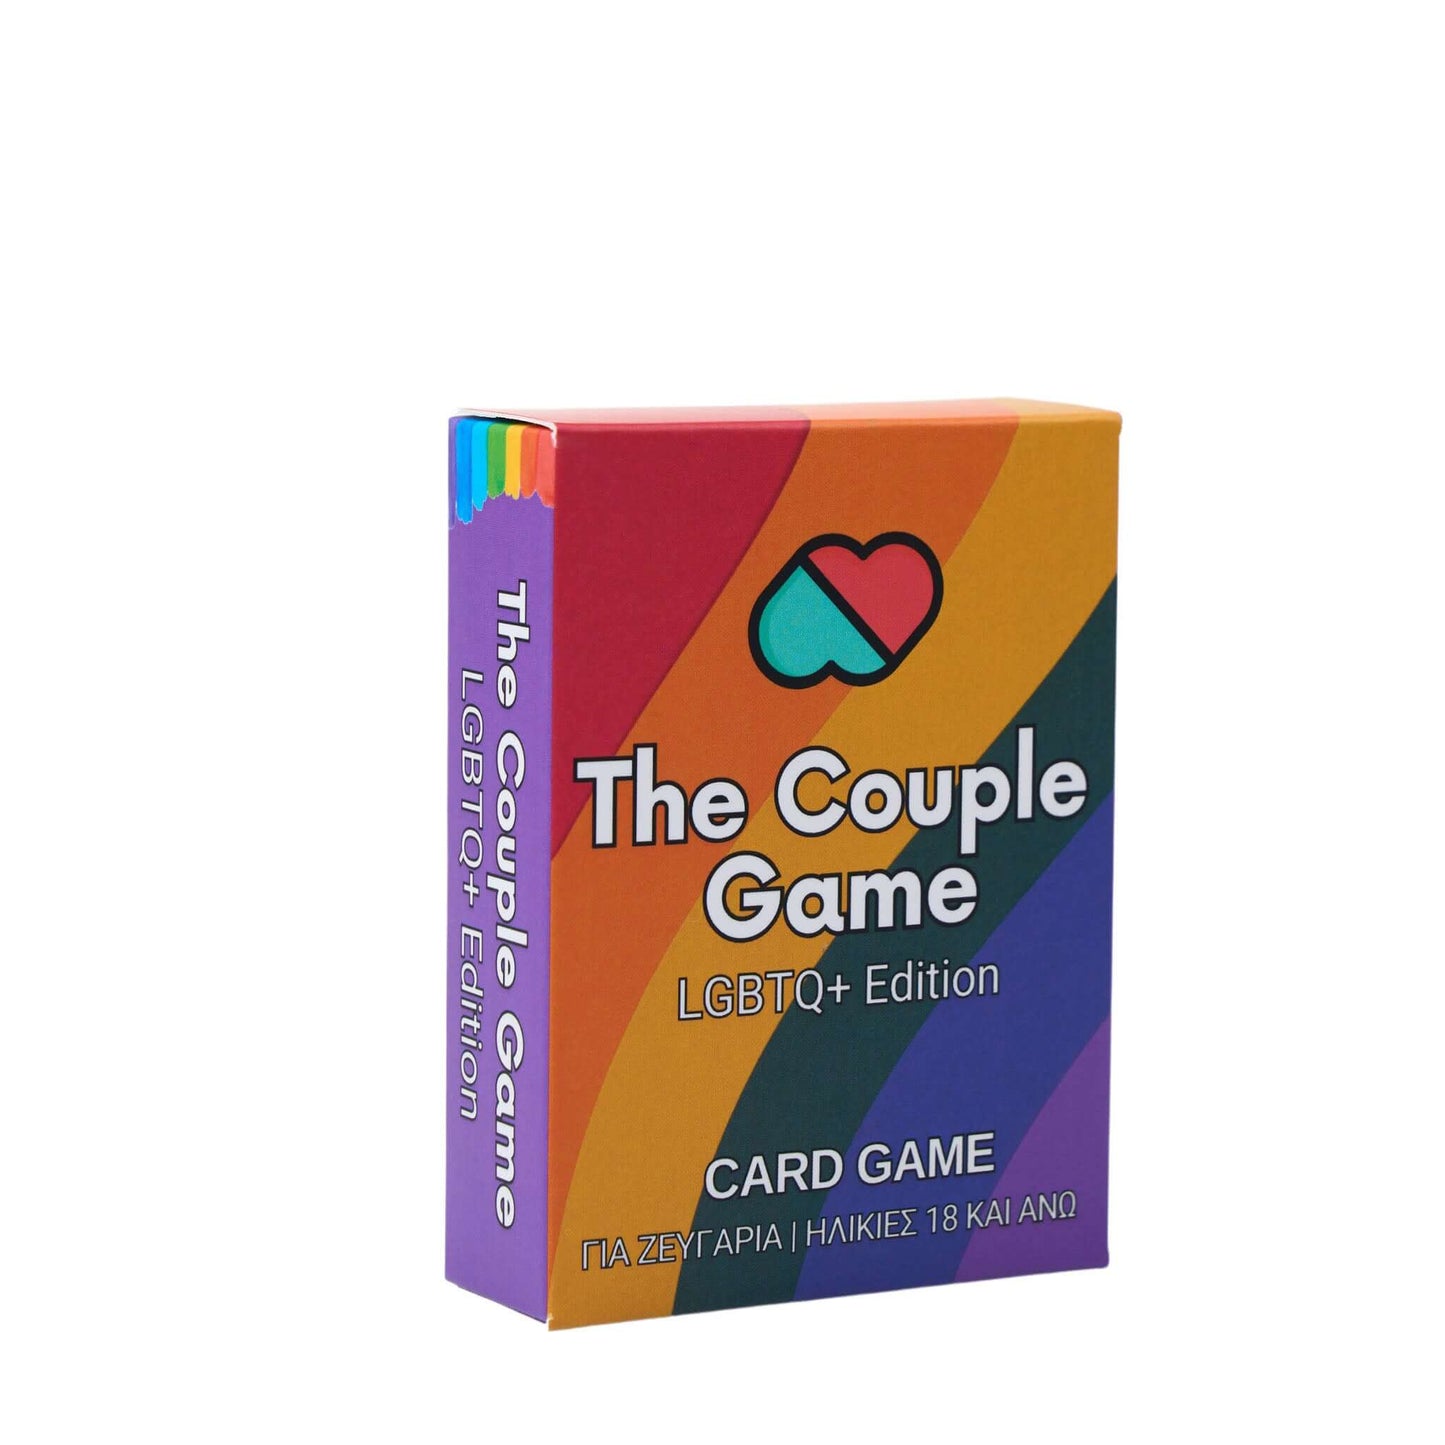 The Couple Game: LGBTQ+ Edition